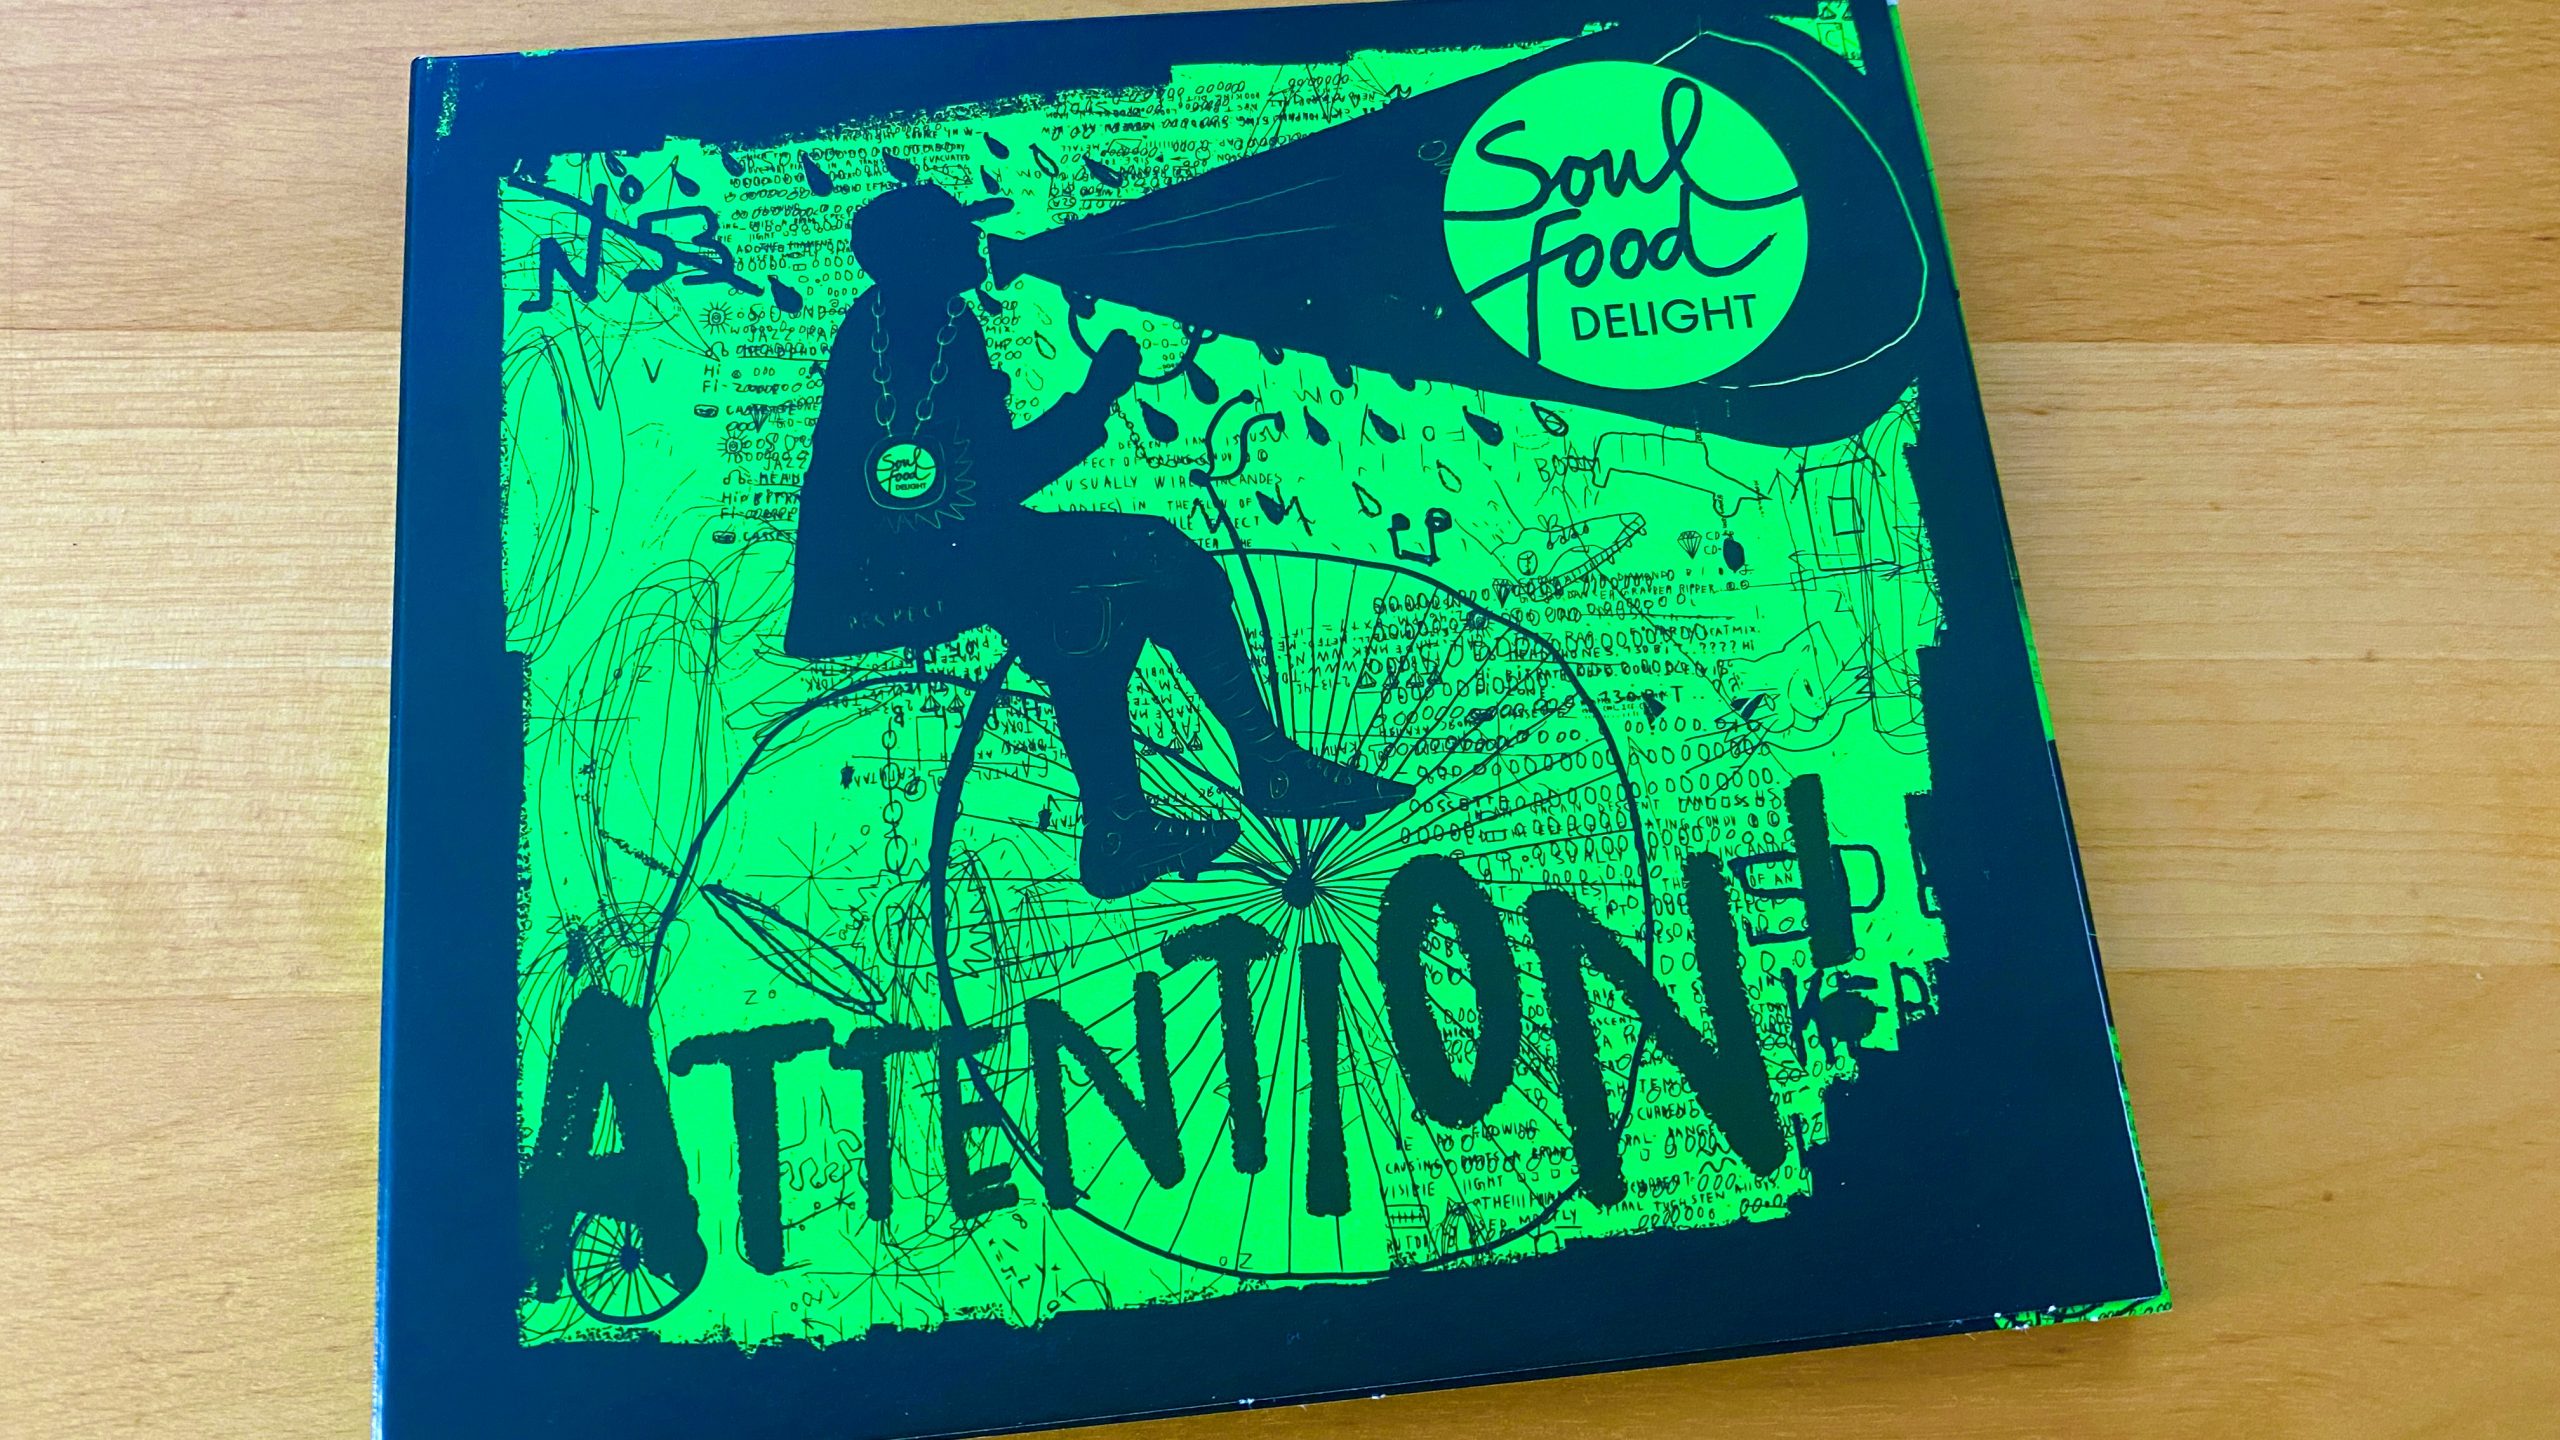 SoulFood Delight: Attention!